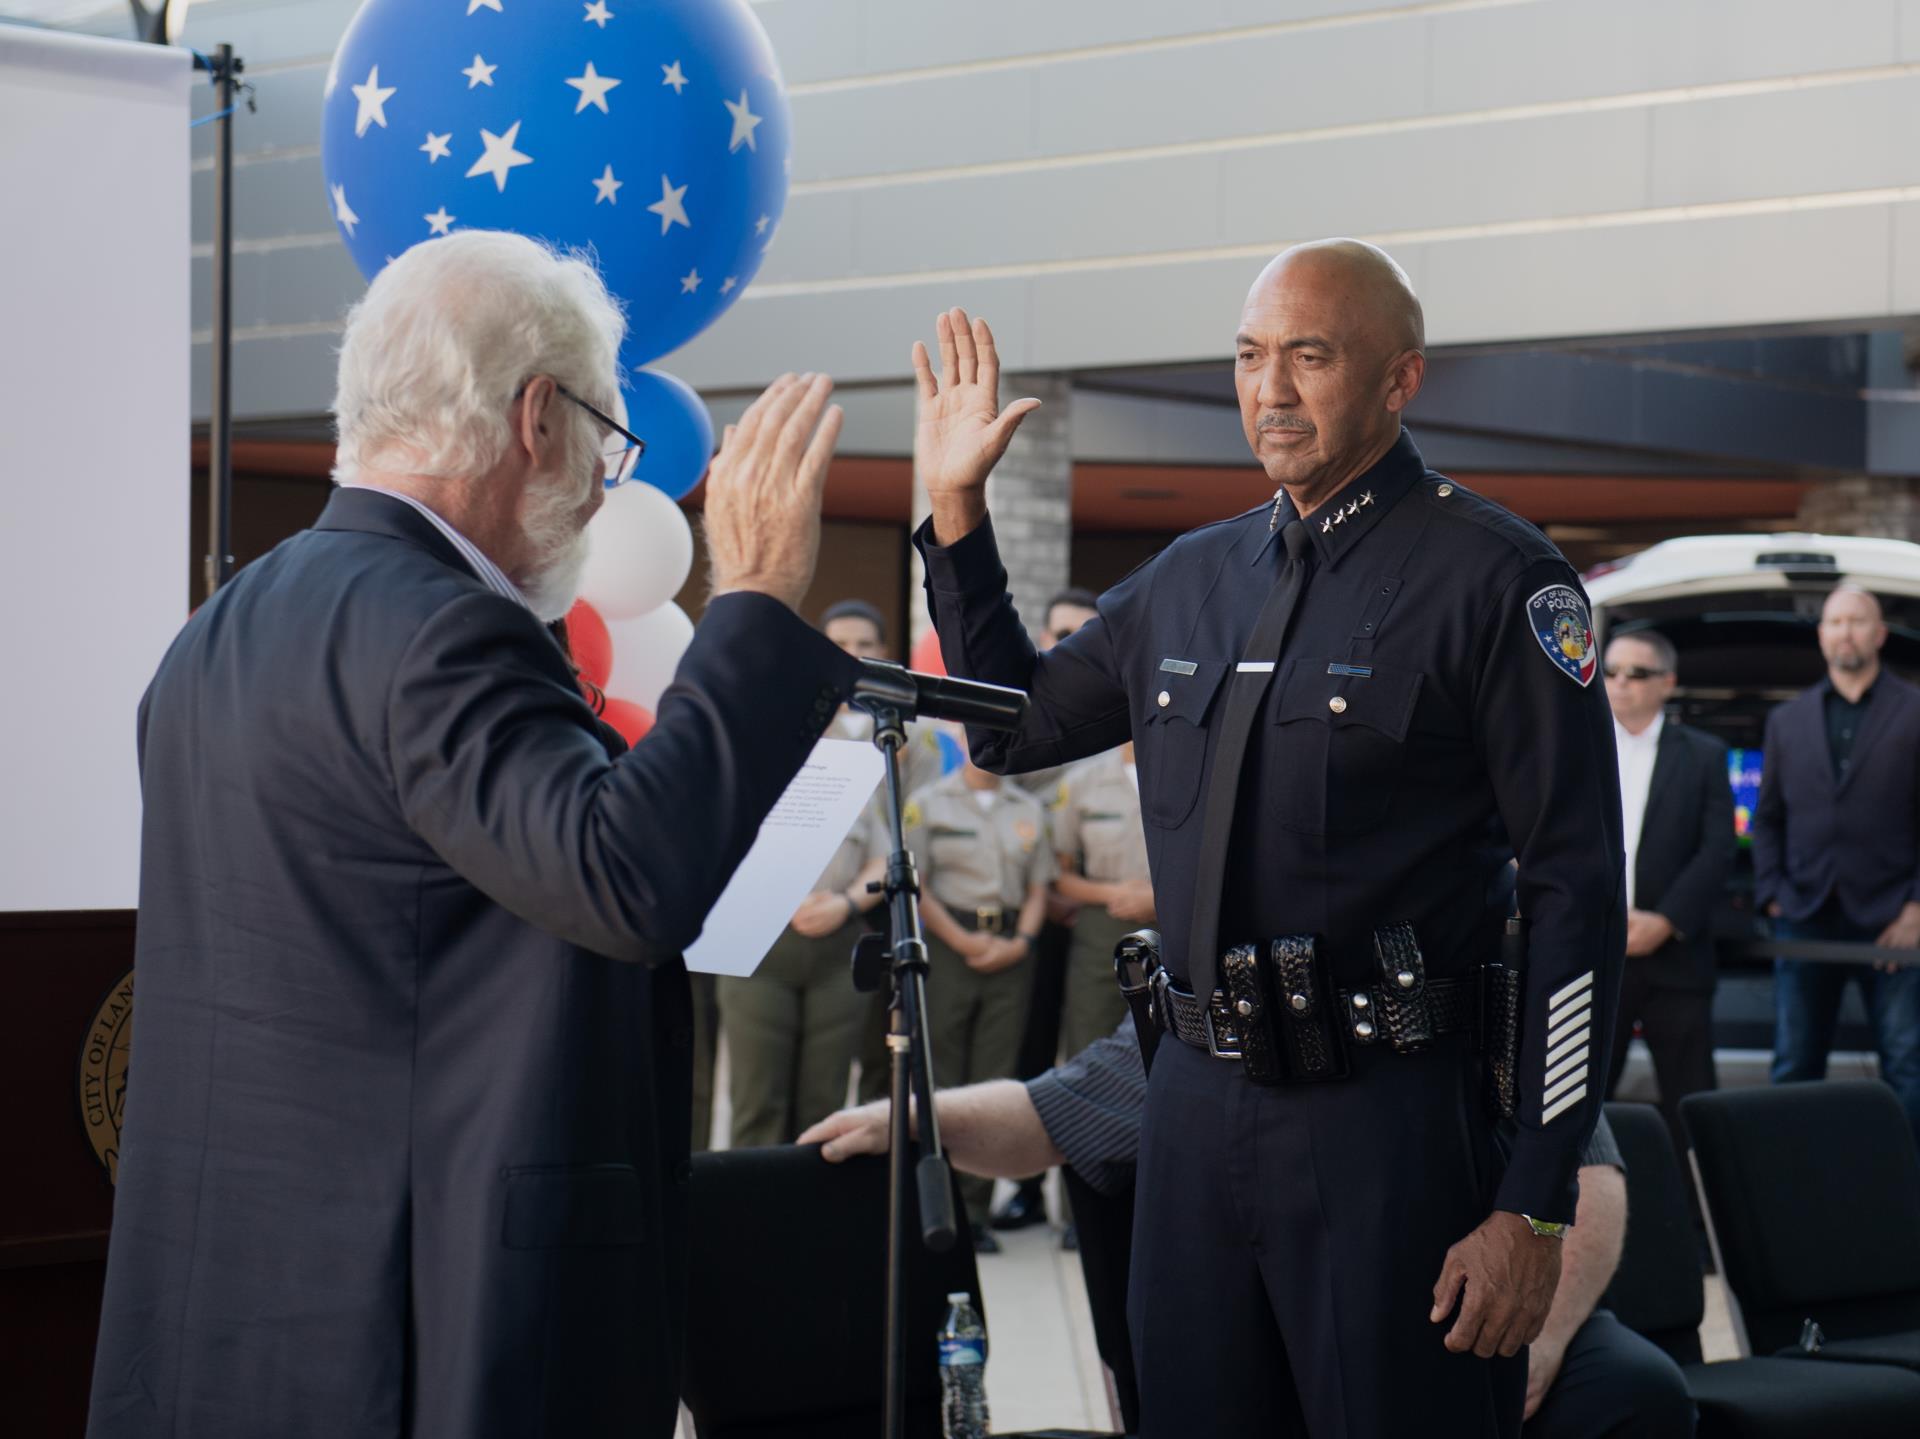 Lancaster Mayor Parris swears in the City's first-ever Chief of Police